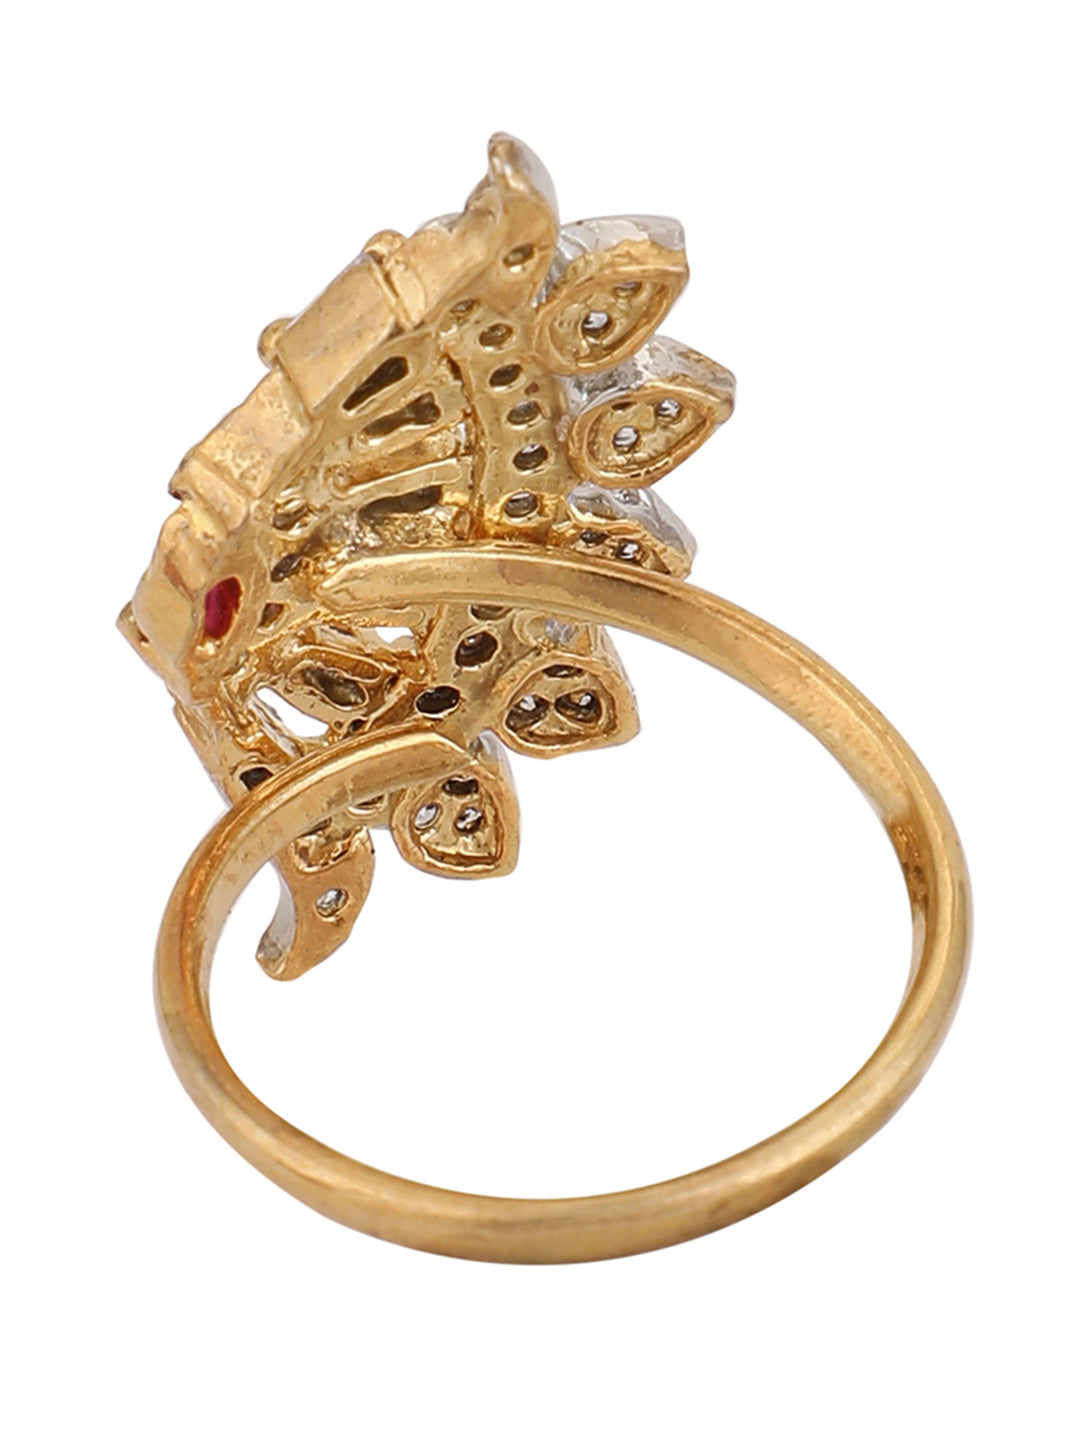 Women's Stylish Cubic Zirconia Studded Adjustable Gold-Plated Classy Ring - Anikas Creation